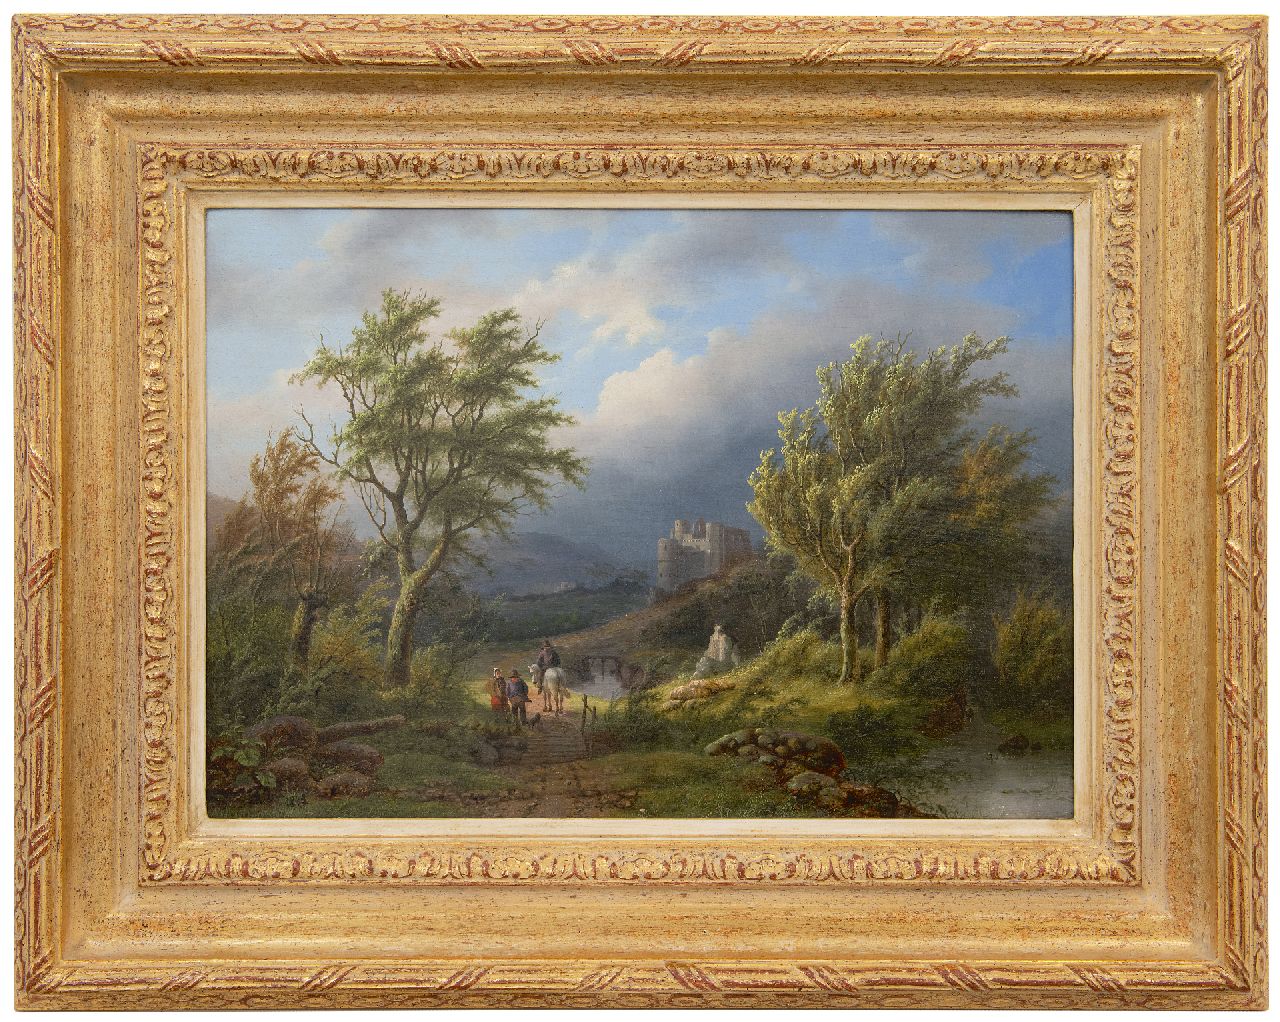 Daiwaille A.J.  | Alexander Joseph Daiwaille | Paintings offered for sale | Emerging storm, oil on panel 34.0 x 47.7 cm, signed l.l. with initials and dated 1848